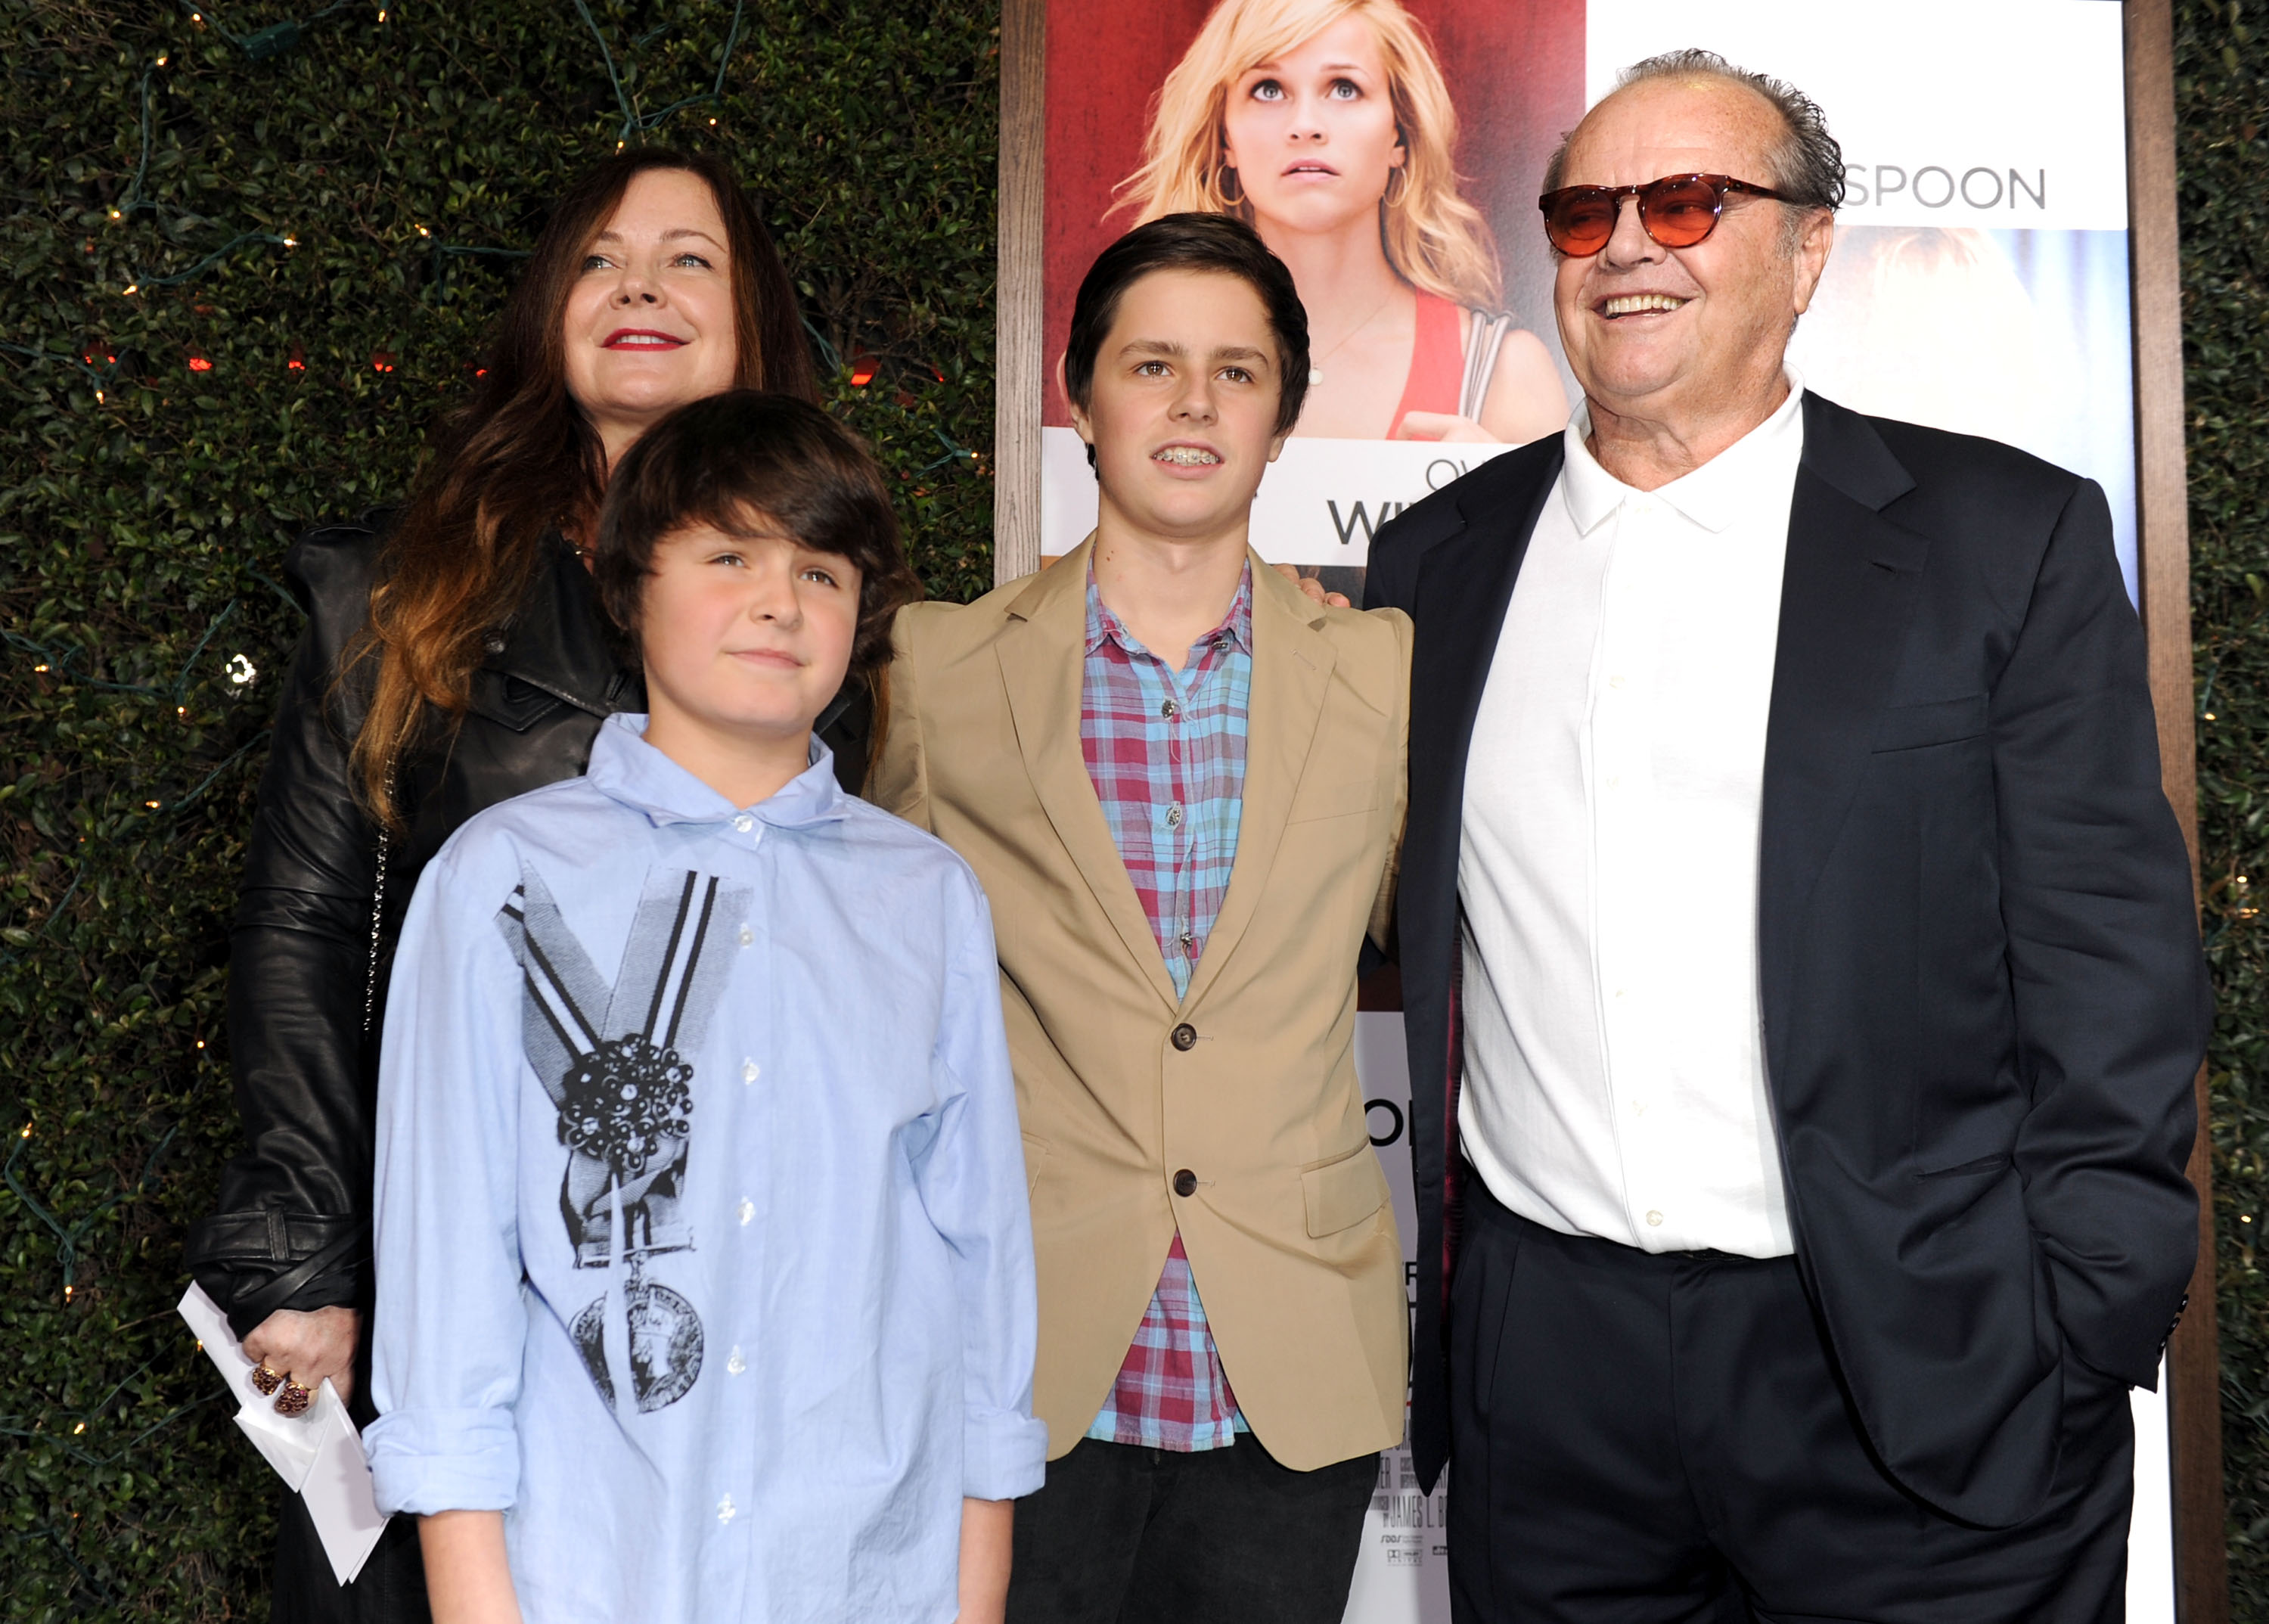 Actor Jack Nicholson (R) with daughter Jennifer Nicholson (L) and her children at the premiere of Columbia Pictures' "How Do You Know" at the Regency Village Theatre on December 13, 2010, in Los Angeles, California. | Source: Getty Images